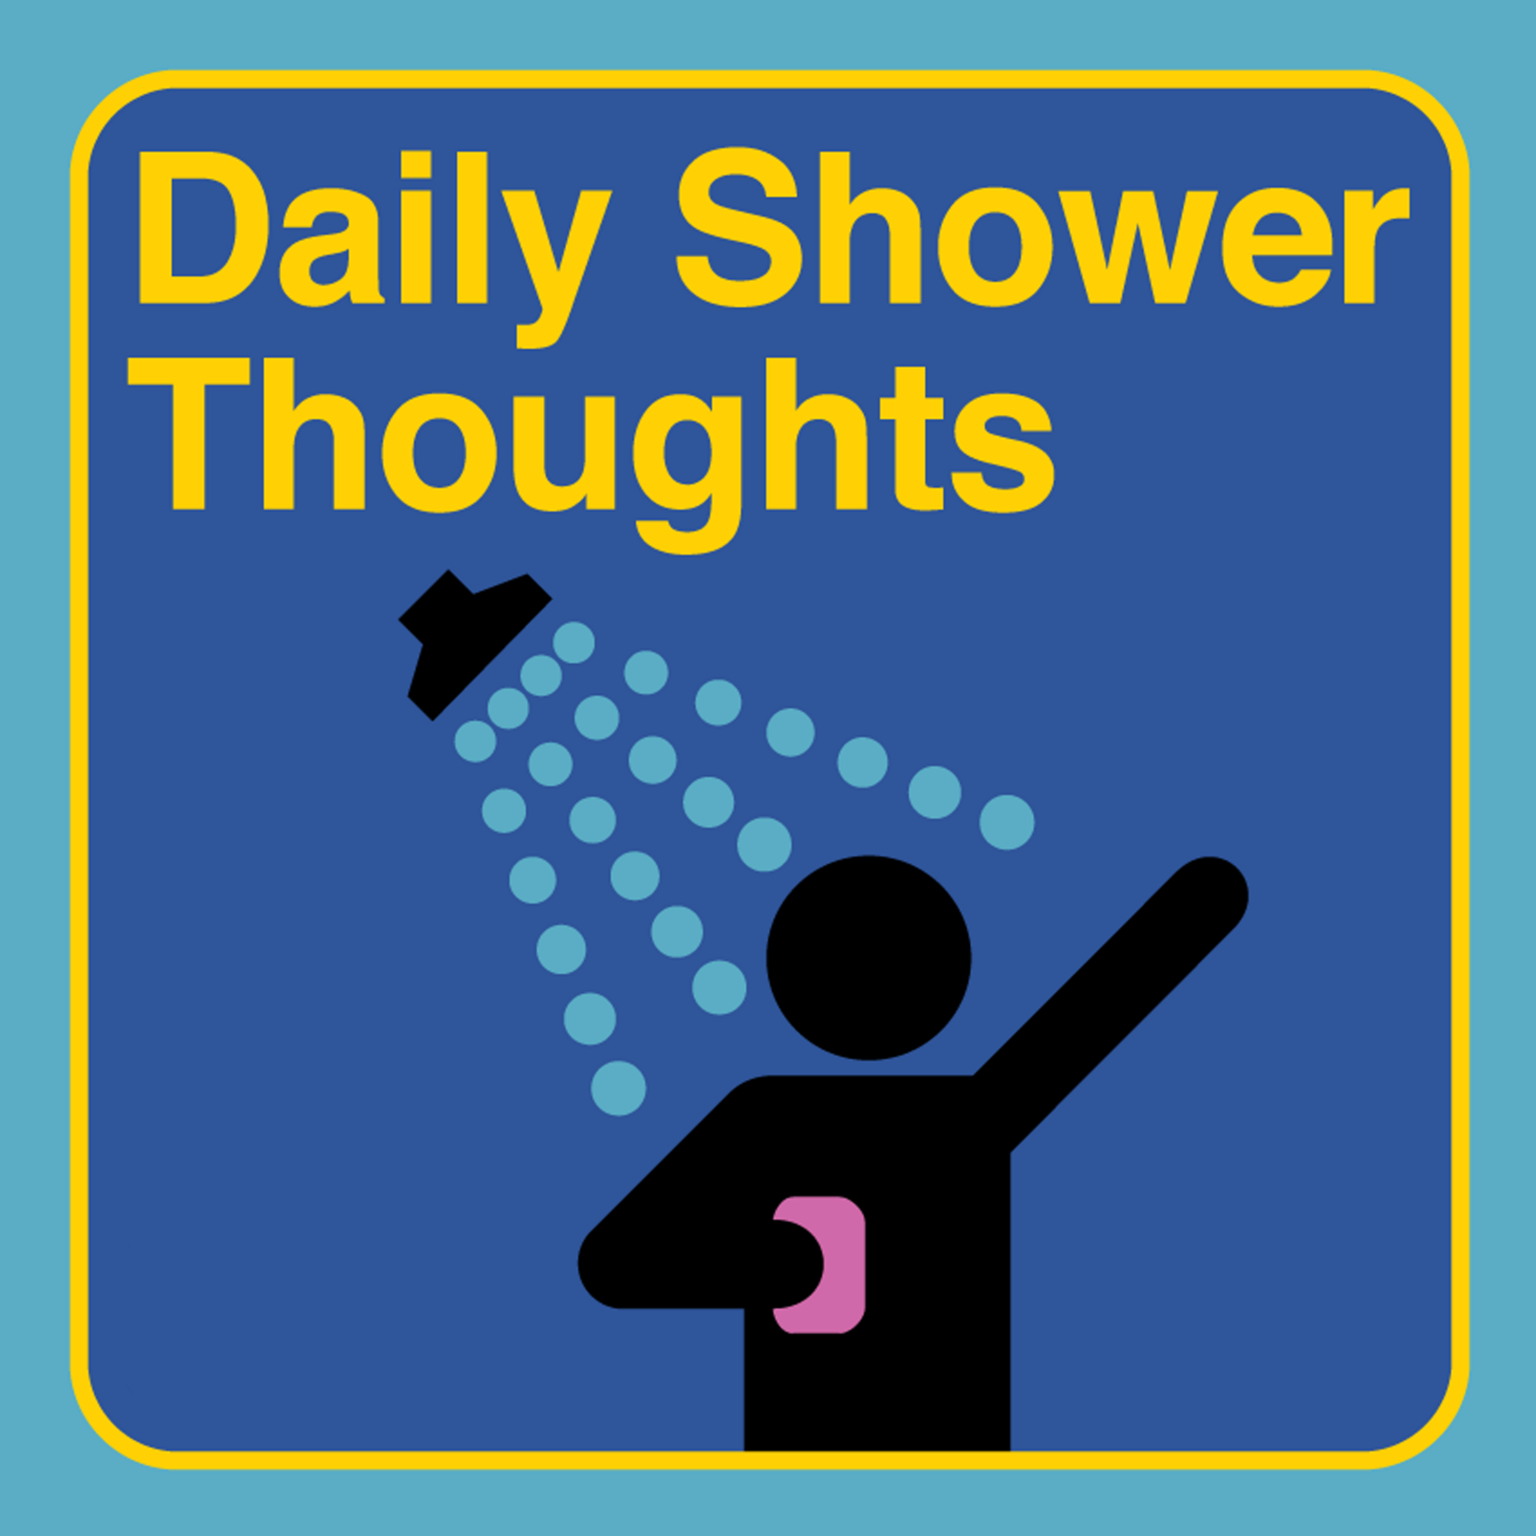 Random, amusing, thought provoking. AI presenters showcase the best from r/showerthoughts.